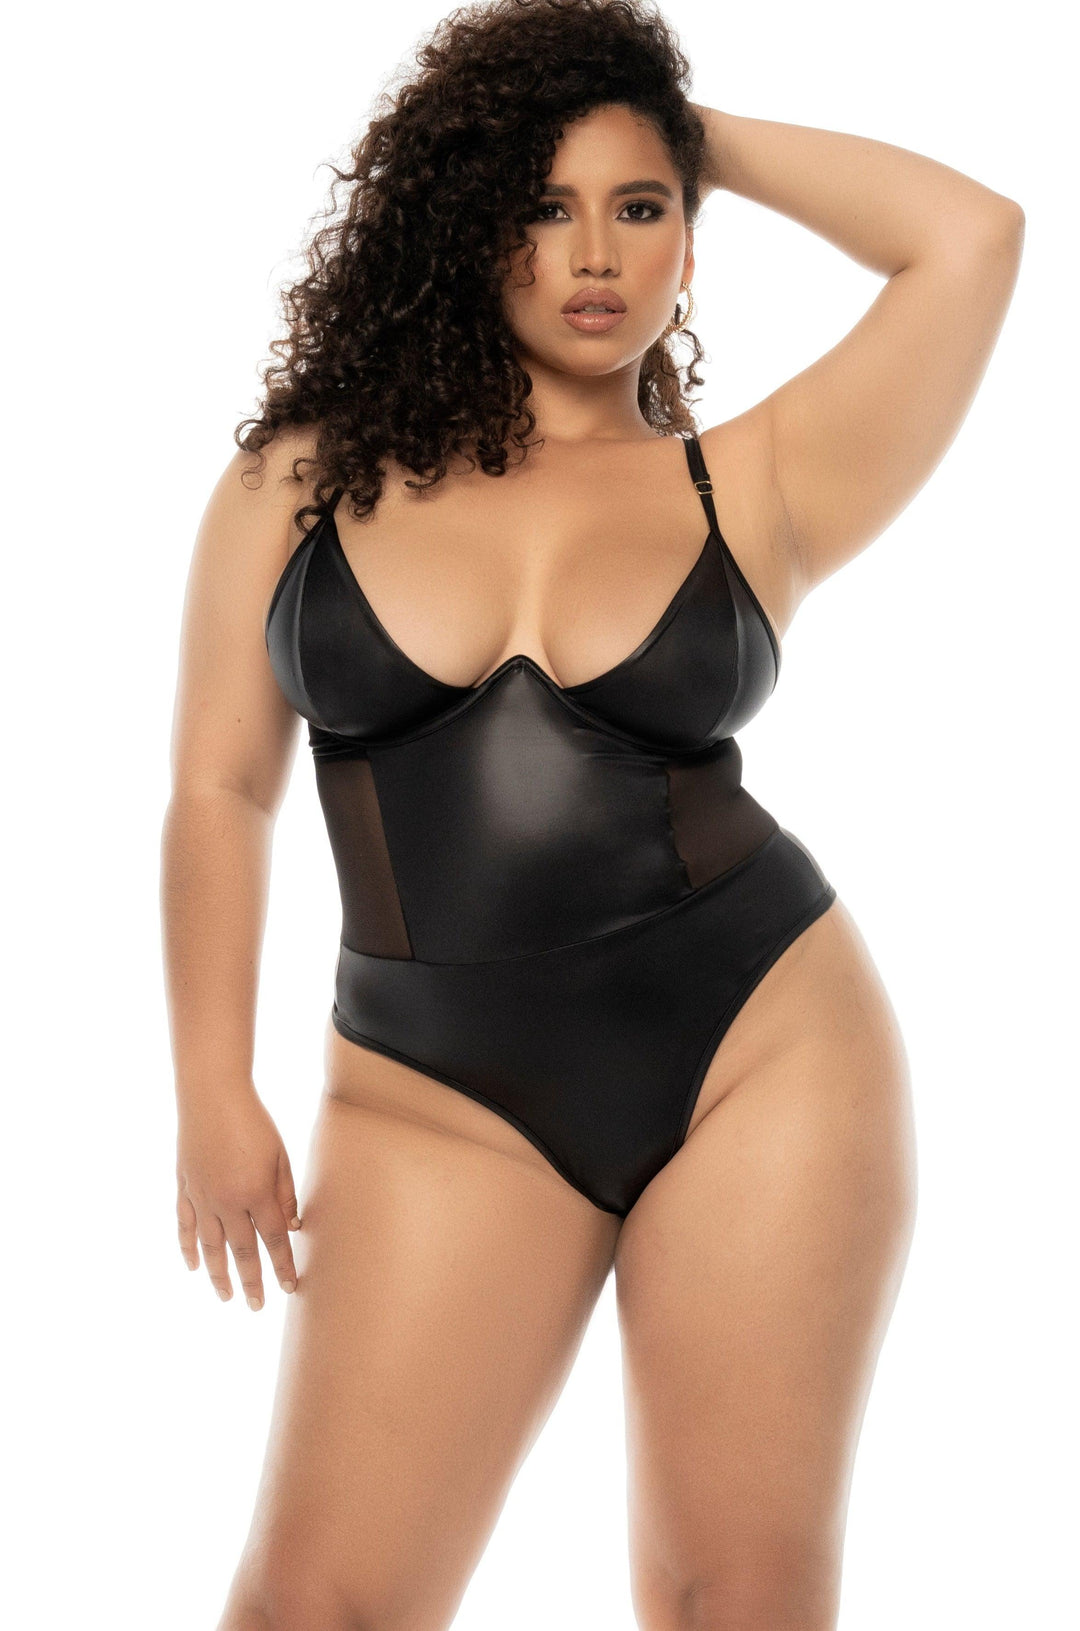 Leather-Effect Fabric with Transparent Tulle Bodysuit | Plus Size - SEXYSHOES.COM